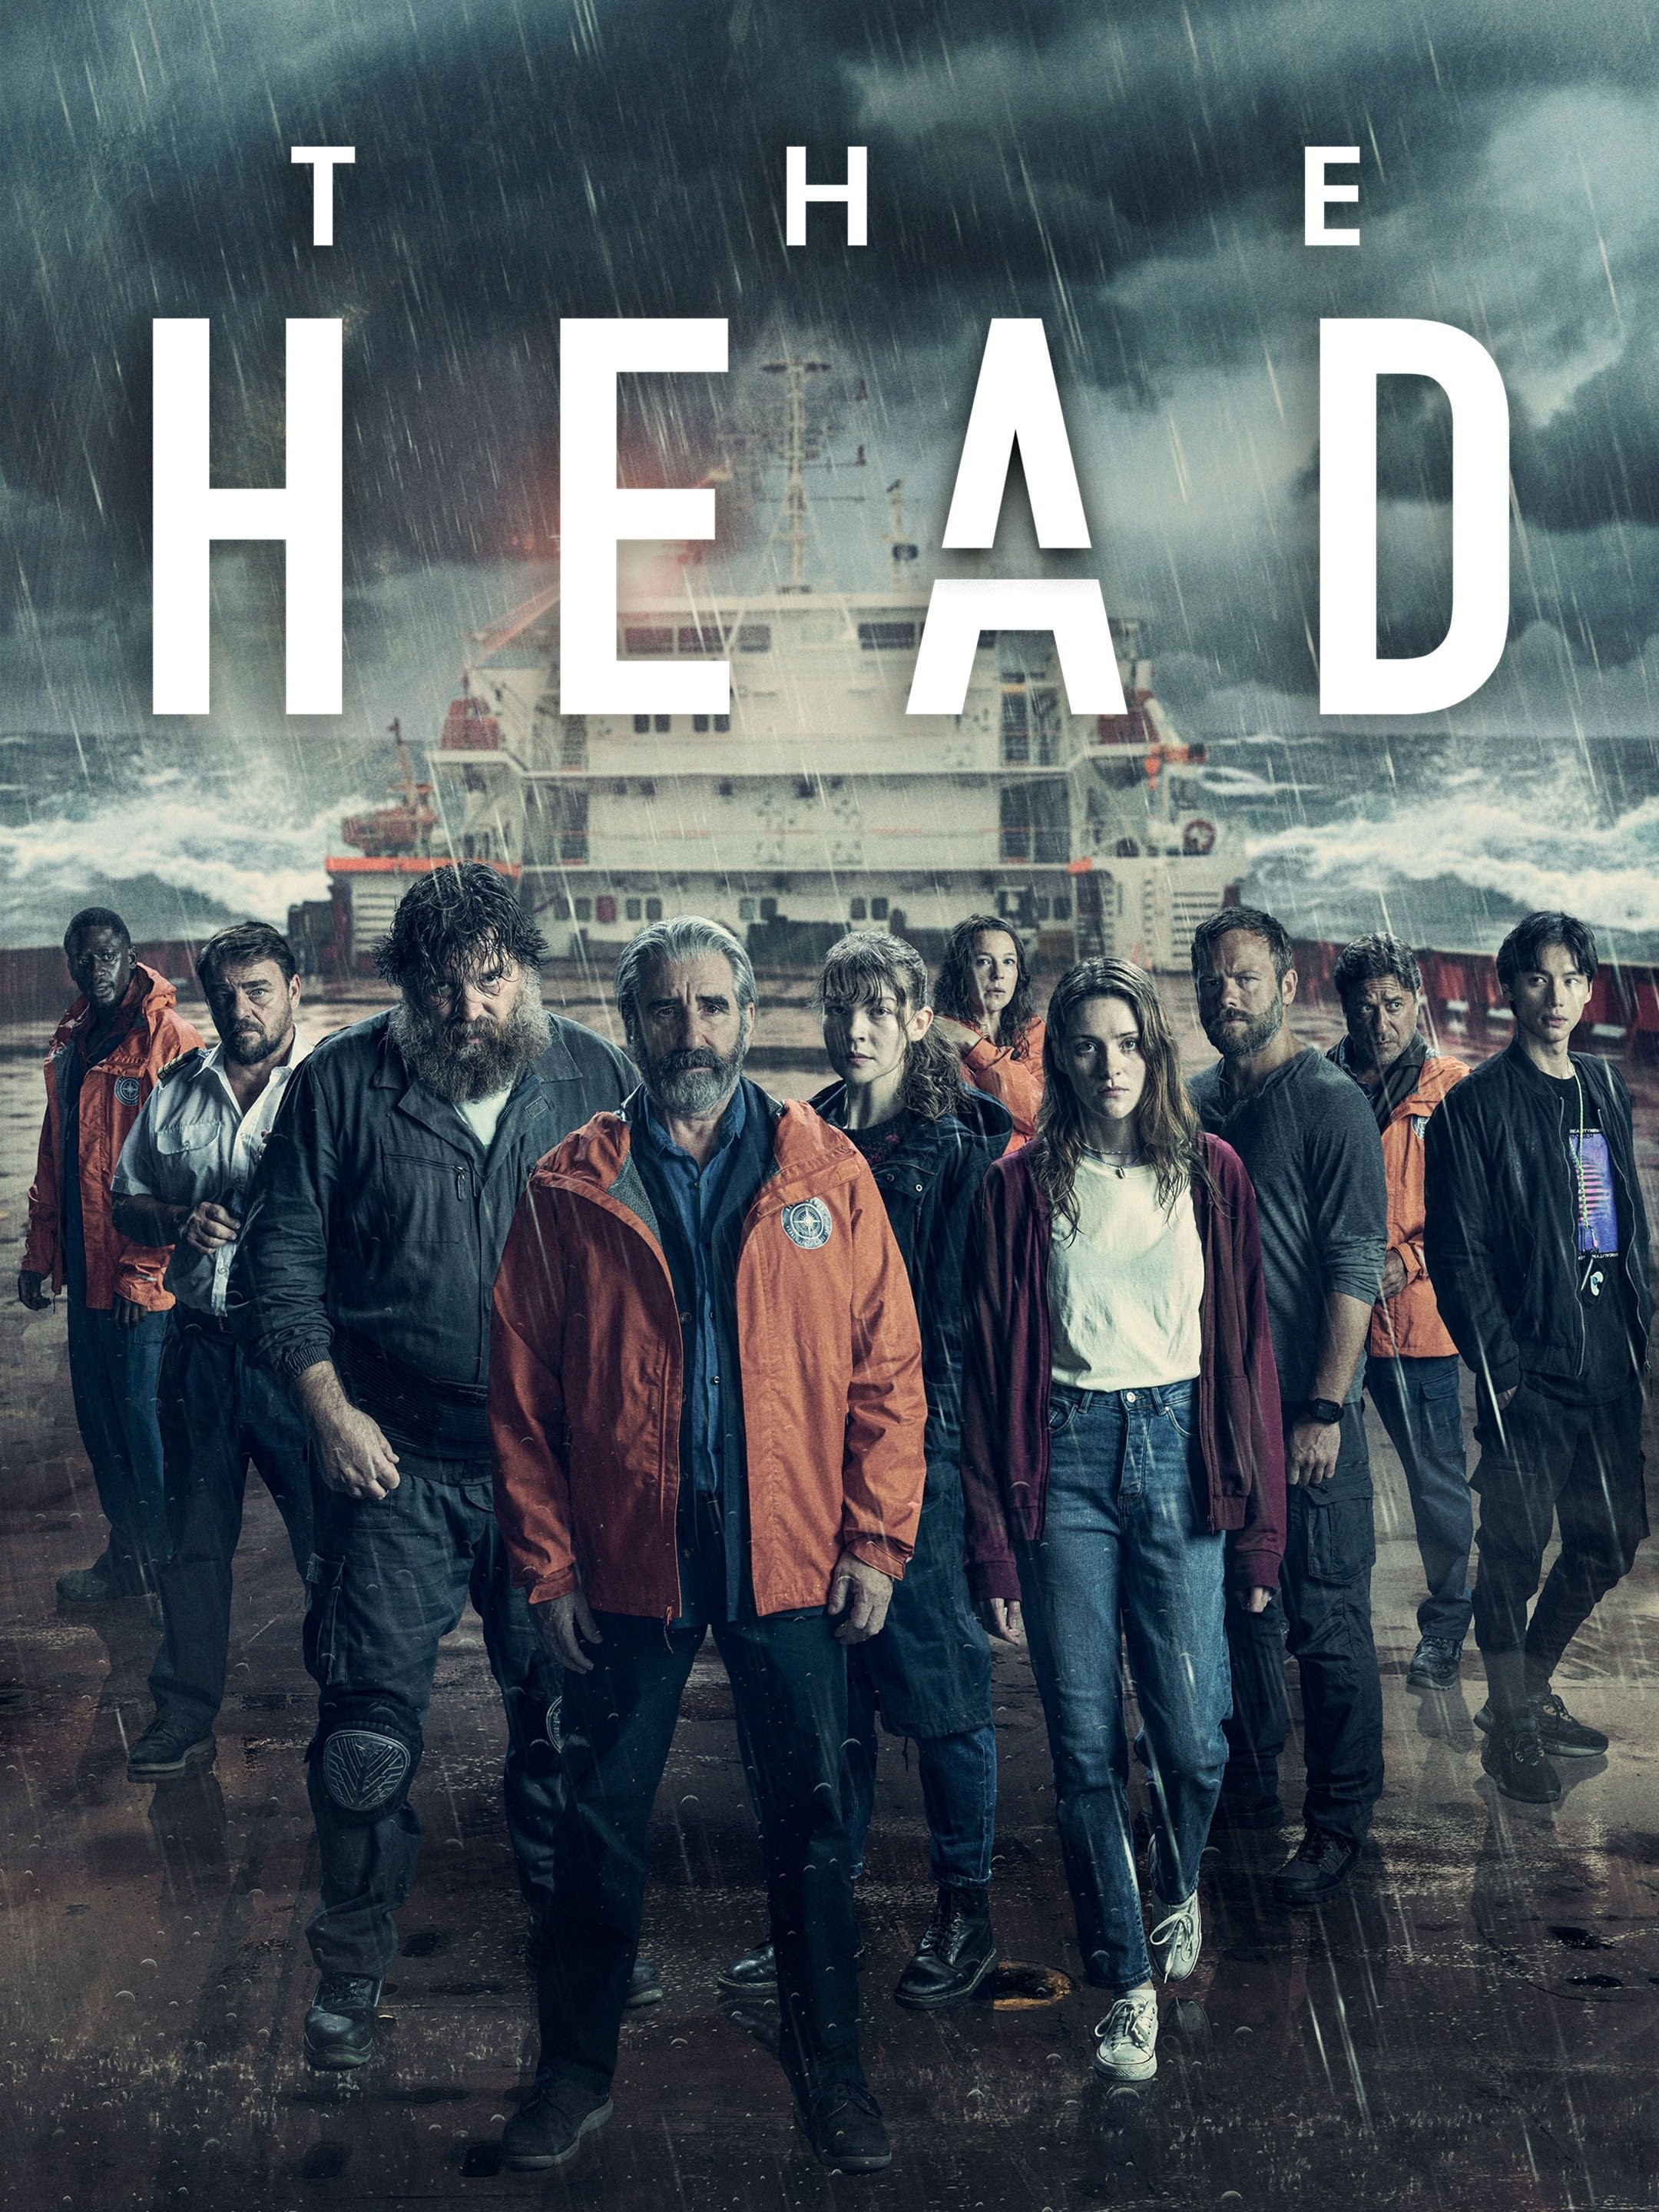 The Head – Review, HBO Max Mystery-Thriller Series